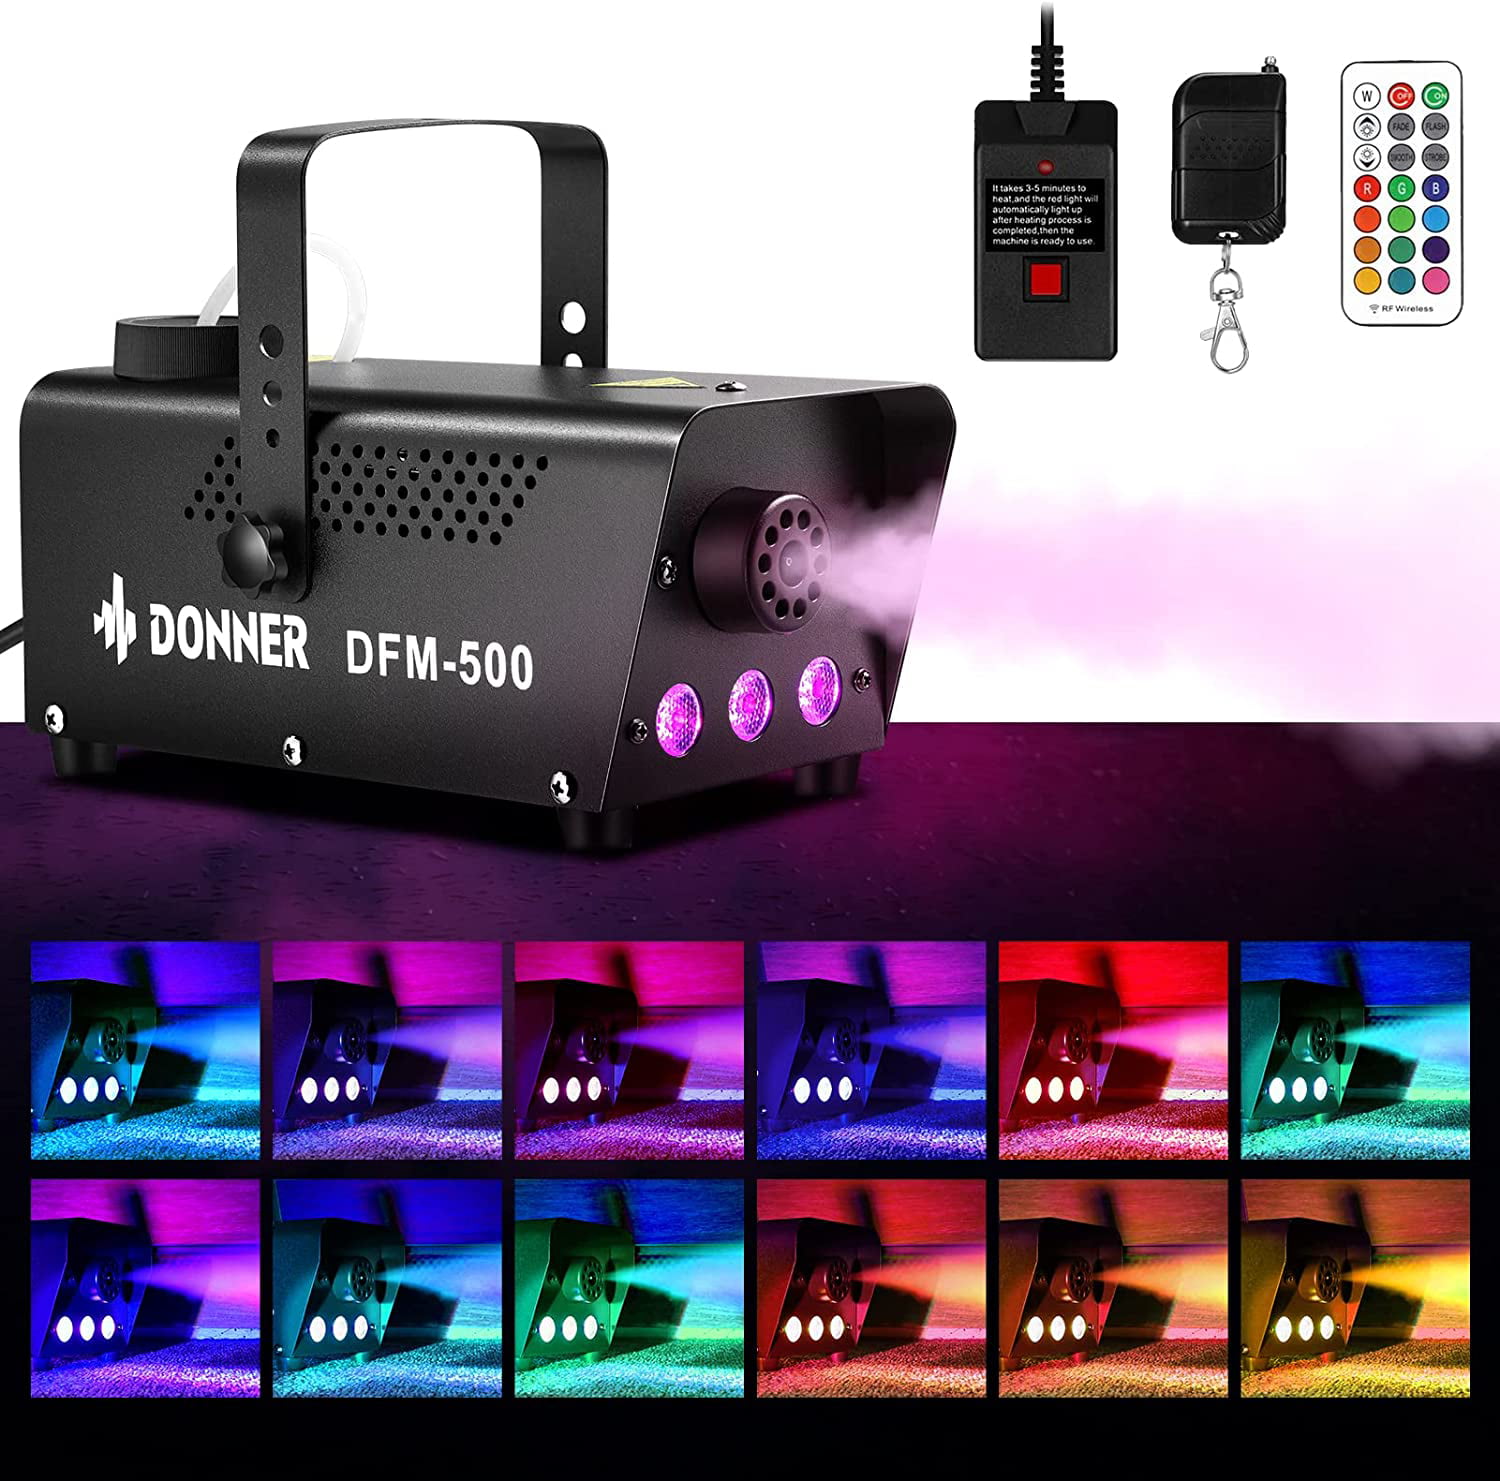 JDR Fog Machine with Controllable lights with Fuse Protection with Wireless and Wired Remote Control for Holidays Parties Weddings Christmas Halloween DJ LED Smoke Machine Red,Green,Blue 